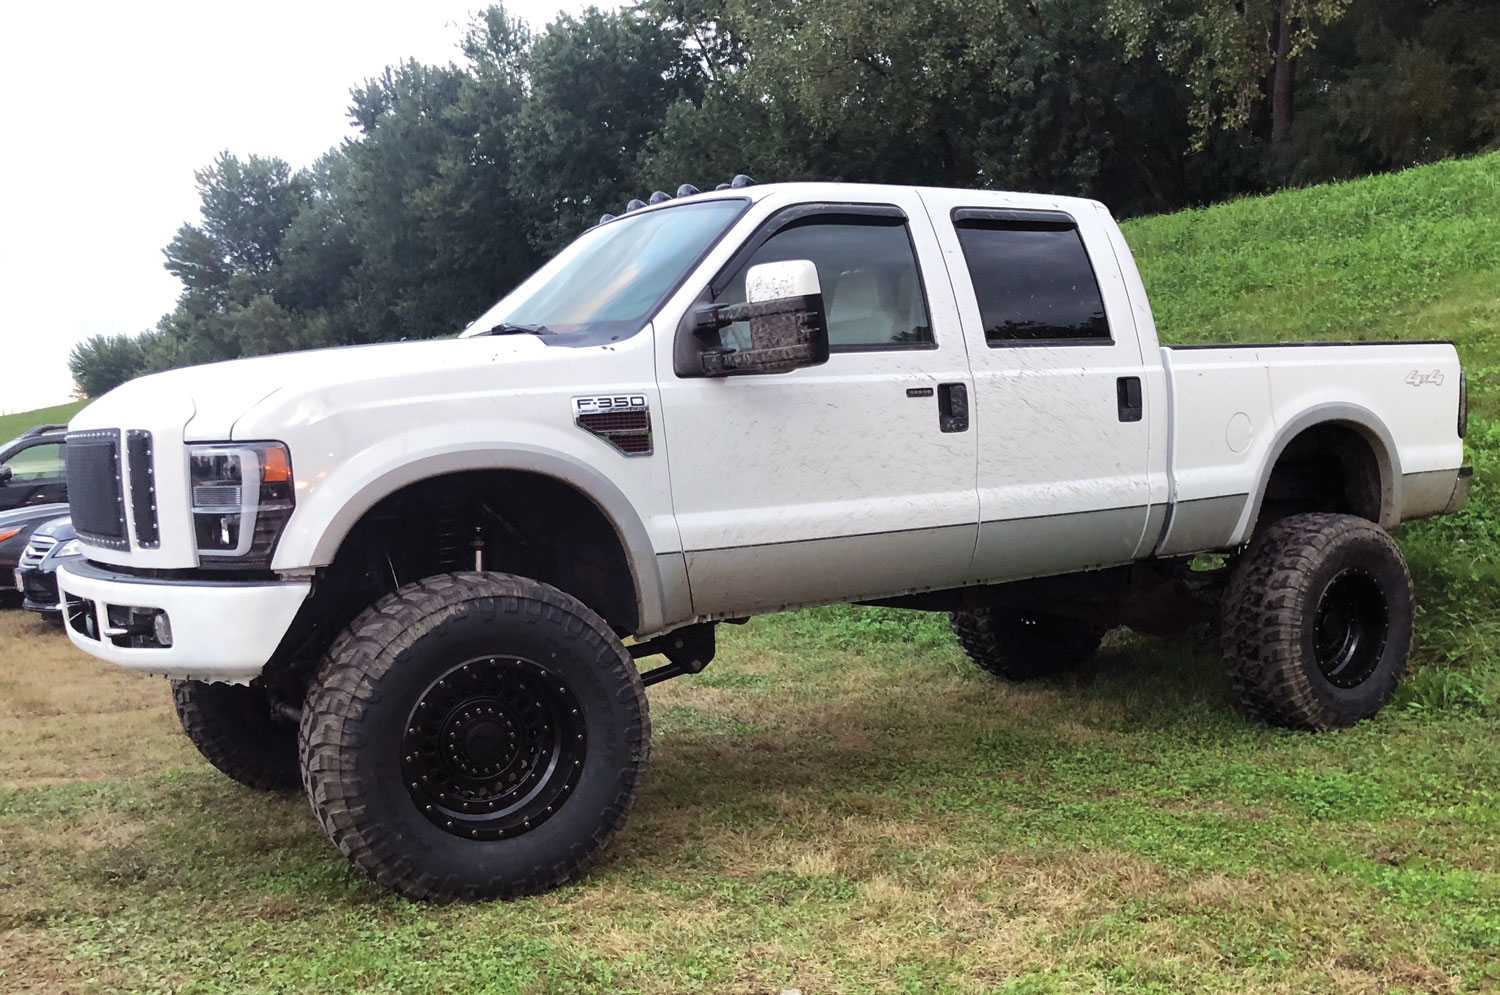 Courtney Craven’s F350 side view on grass